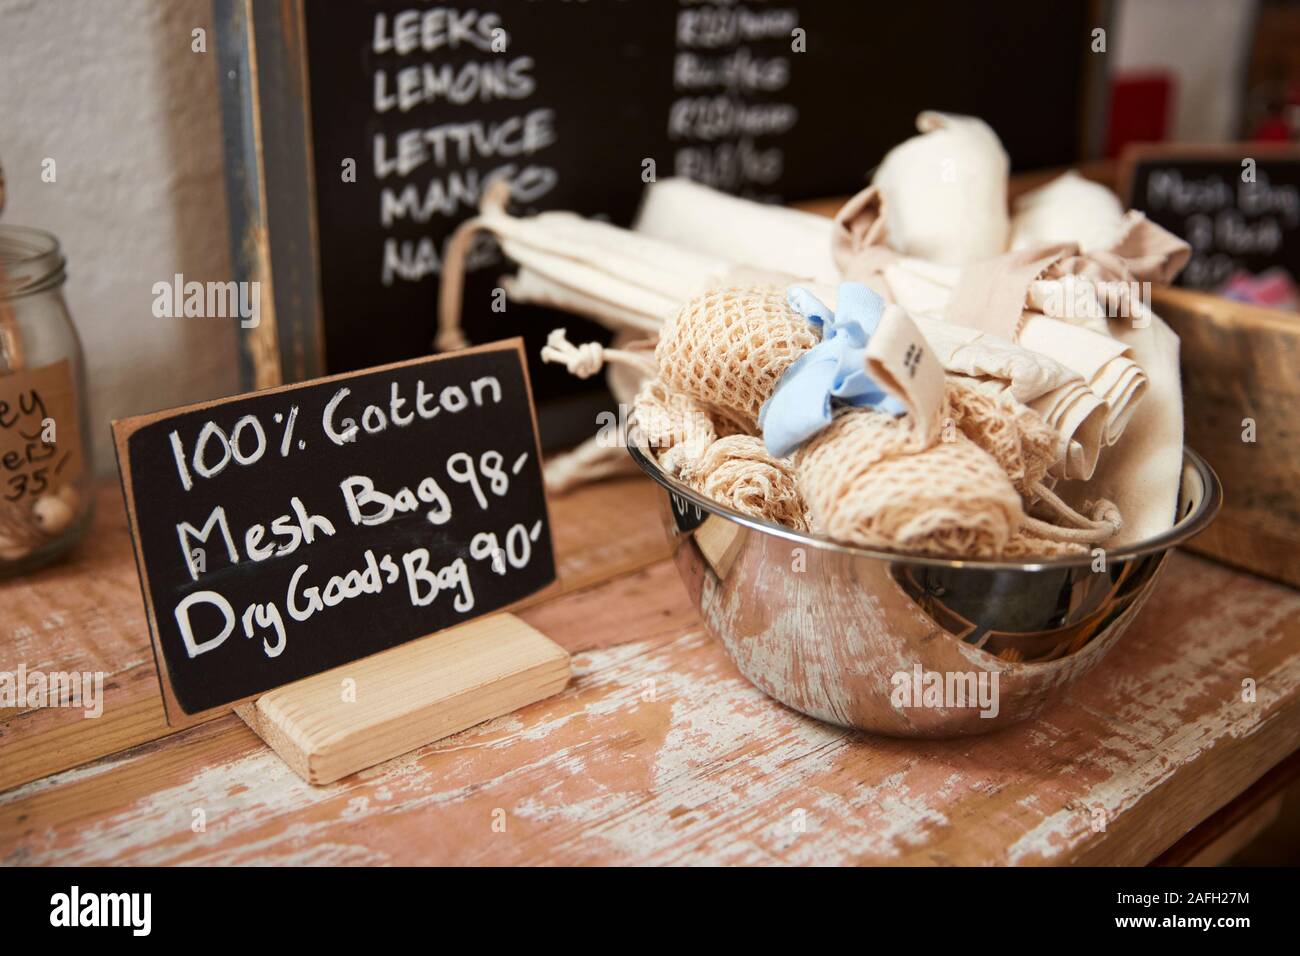 Display Of Recyclable Cotton Bags In Packaging Free Grocery Store Stock Photo